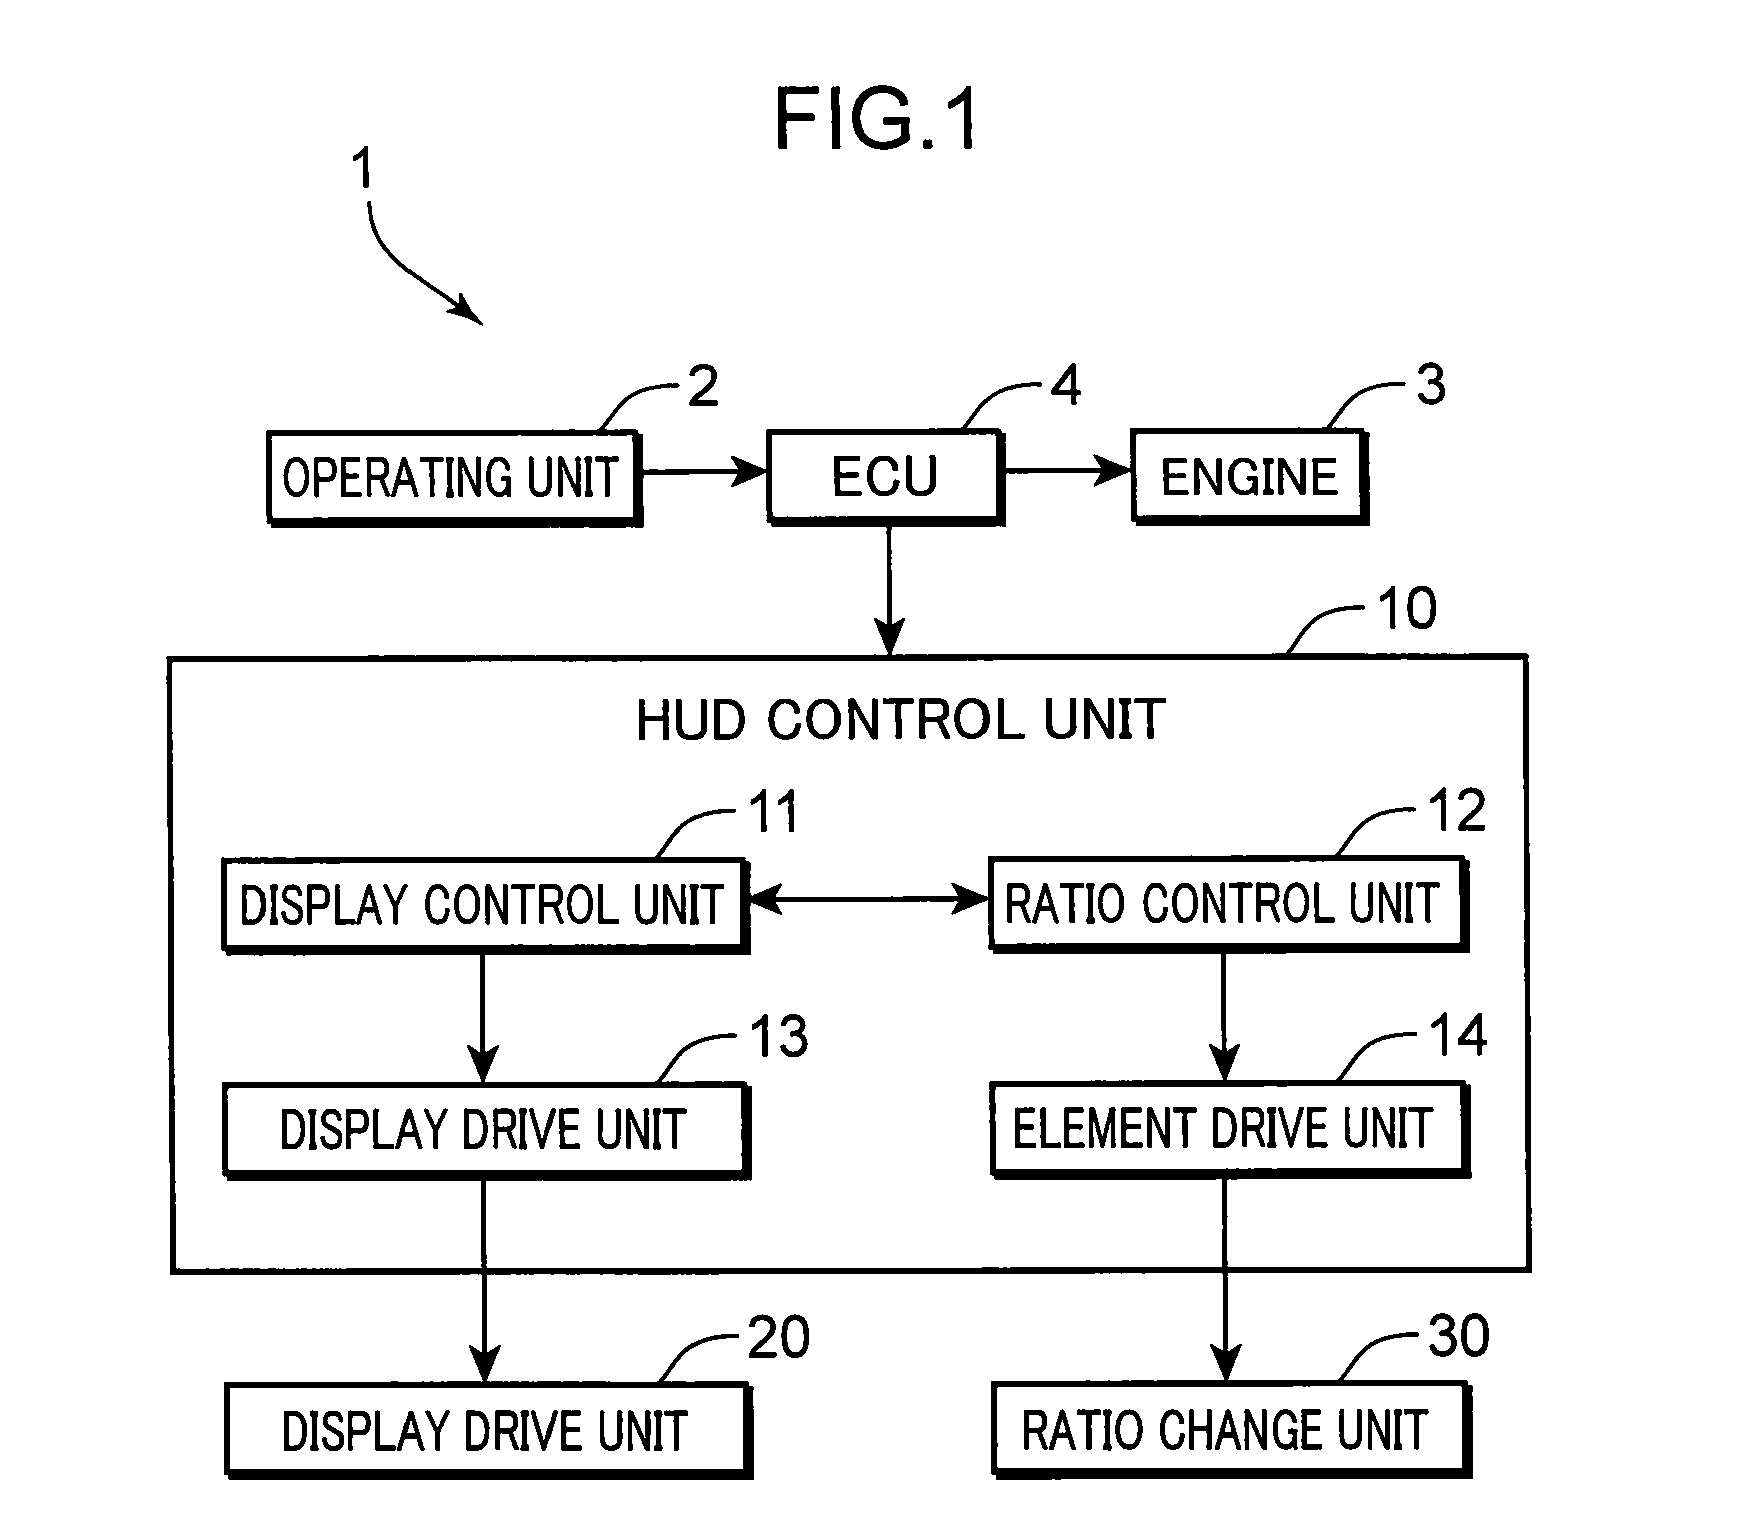 Transmissive display apparatus, mobile object and control apparatus